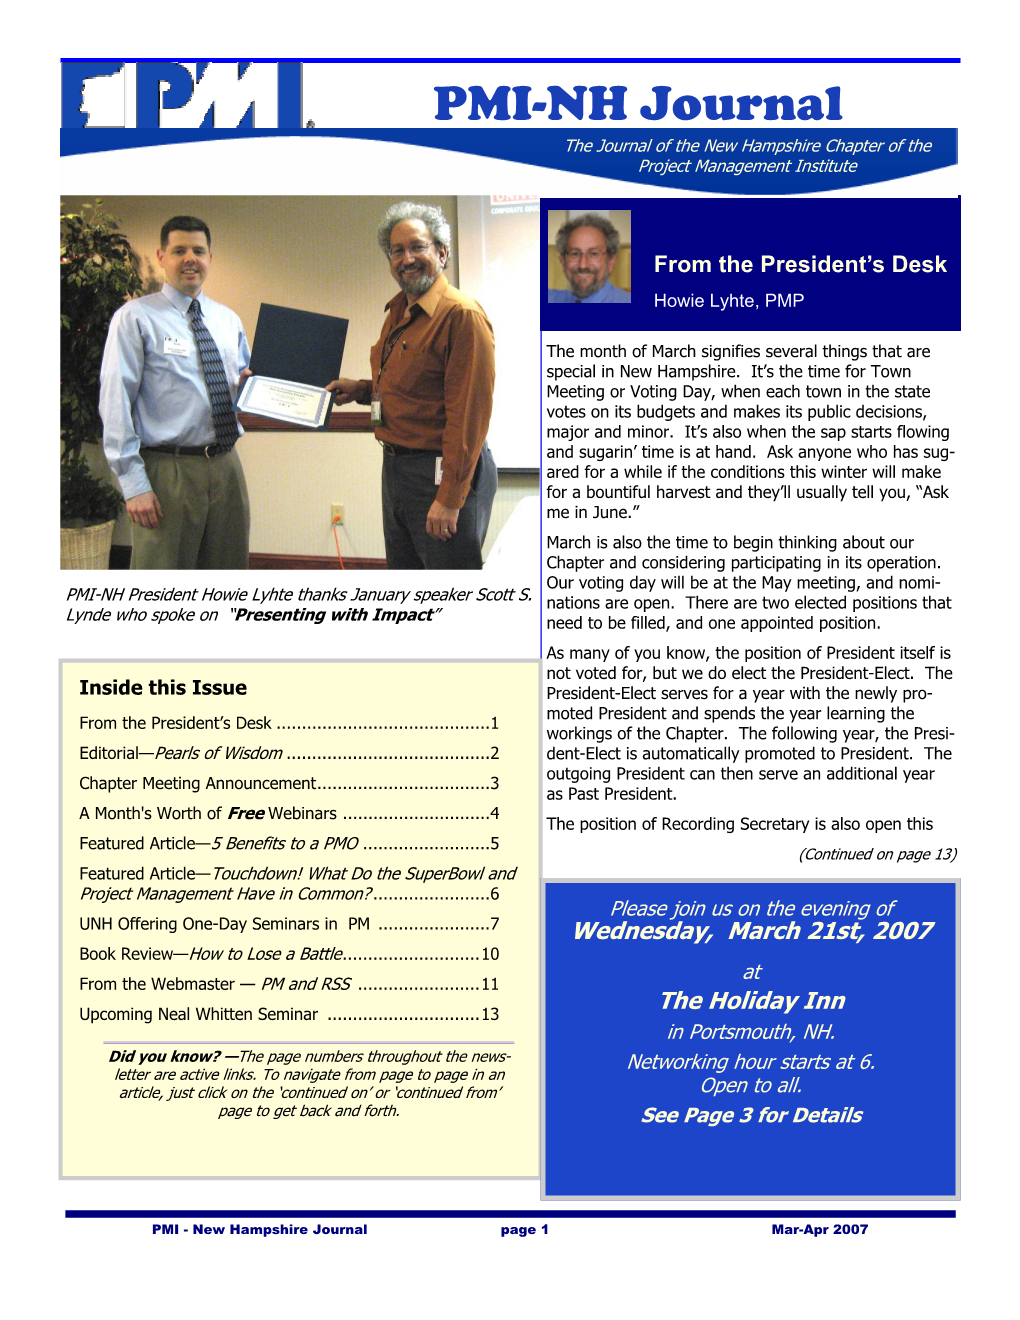 PMI-NH Journal the Journal of the New Hampshire Chapter of the Project Management Institute